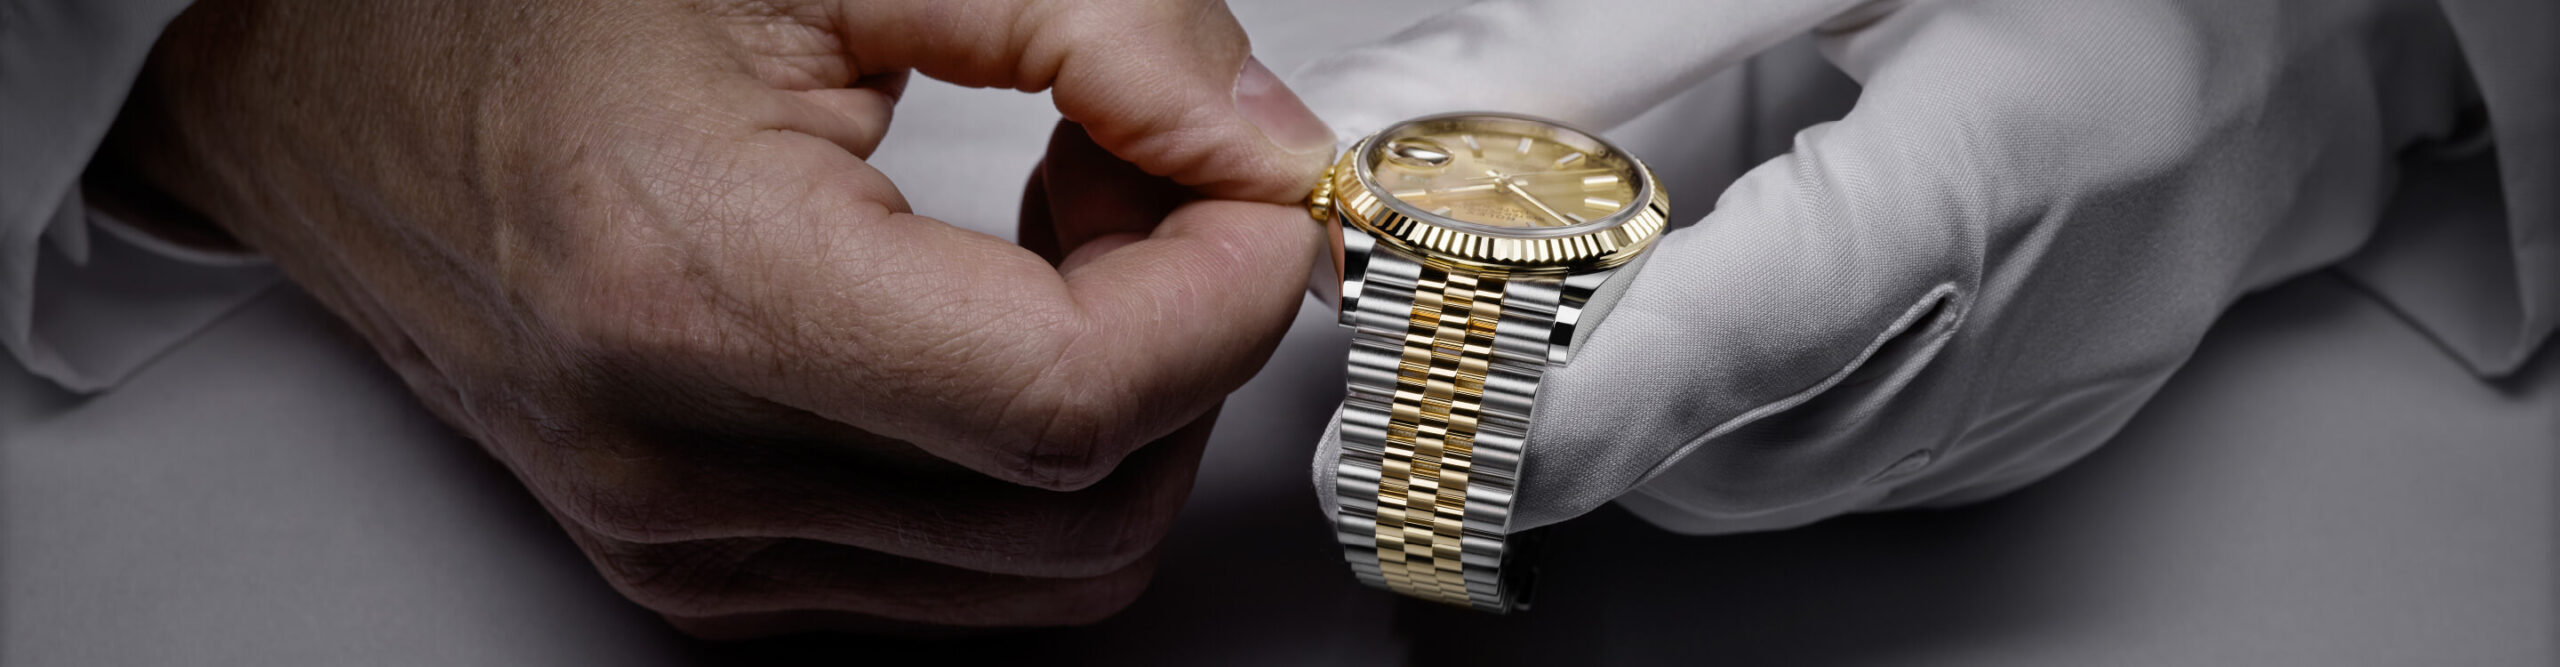 servicing your rolex - global watch company